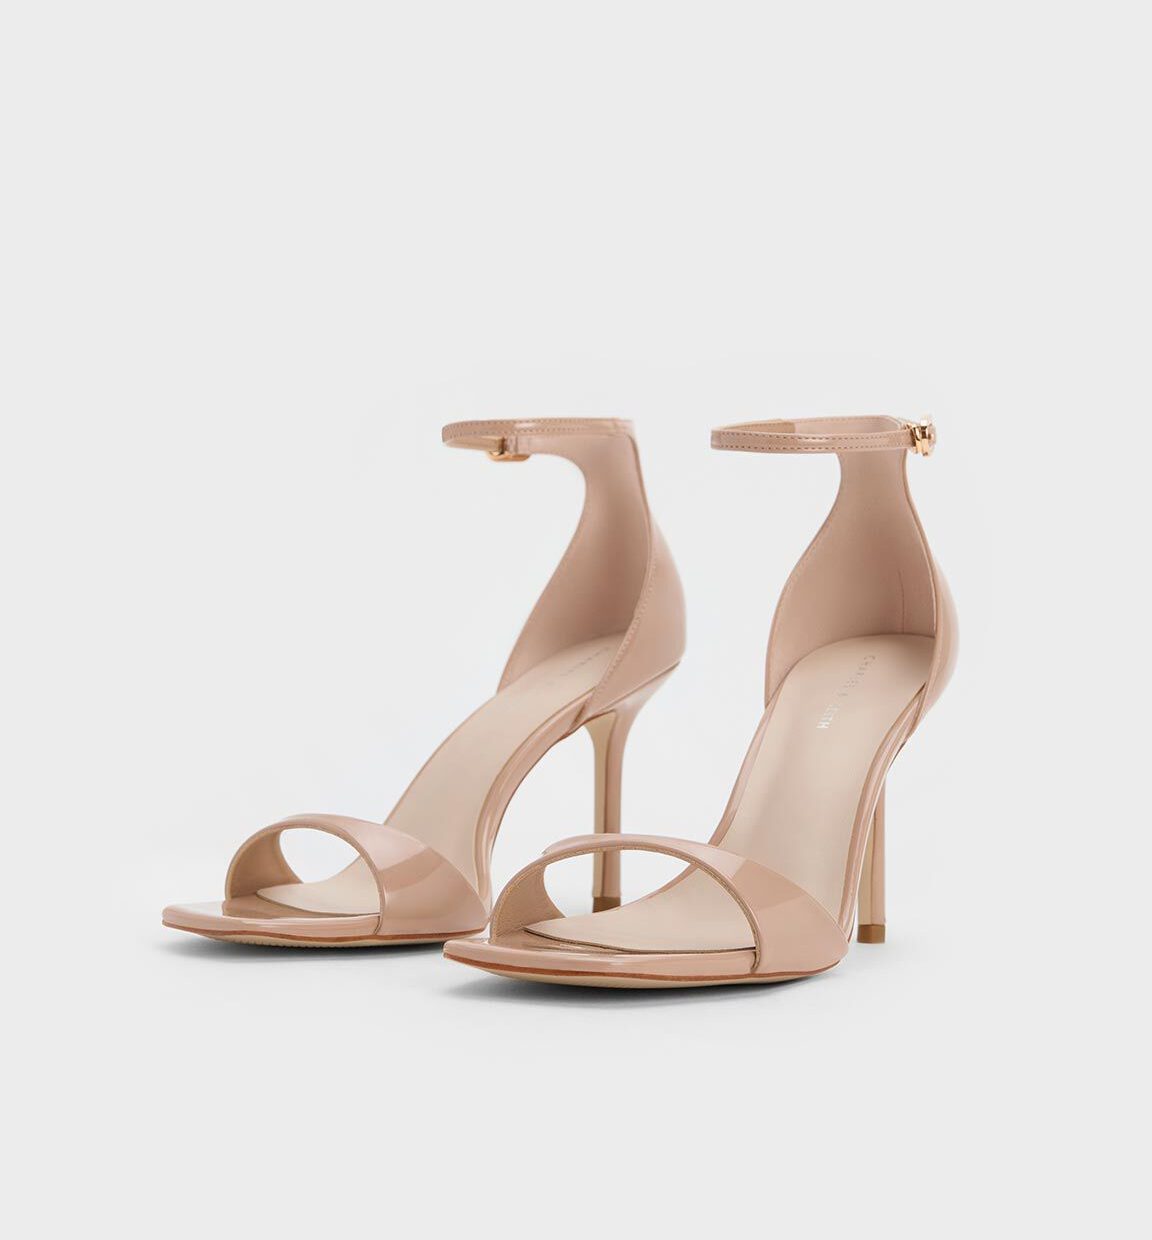 Nude Heels: Elevate Your Style with Timeless Elegance